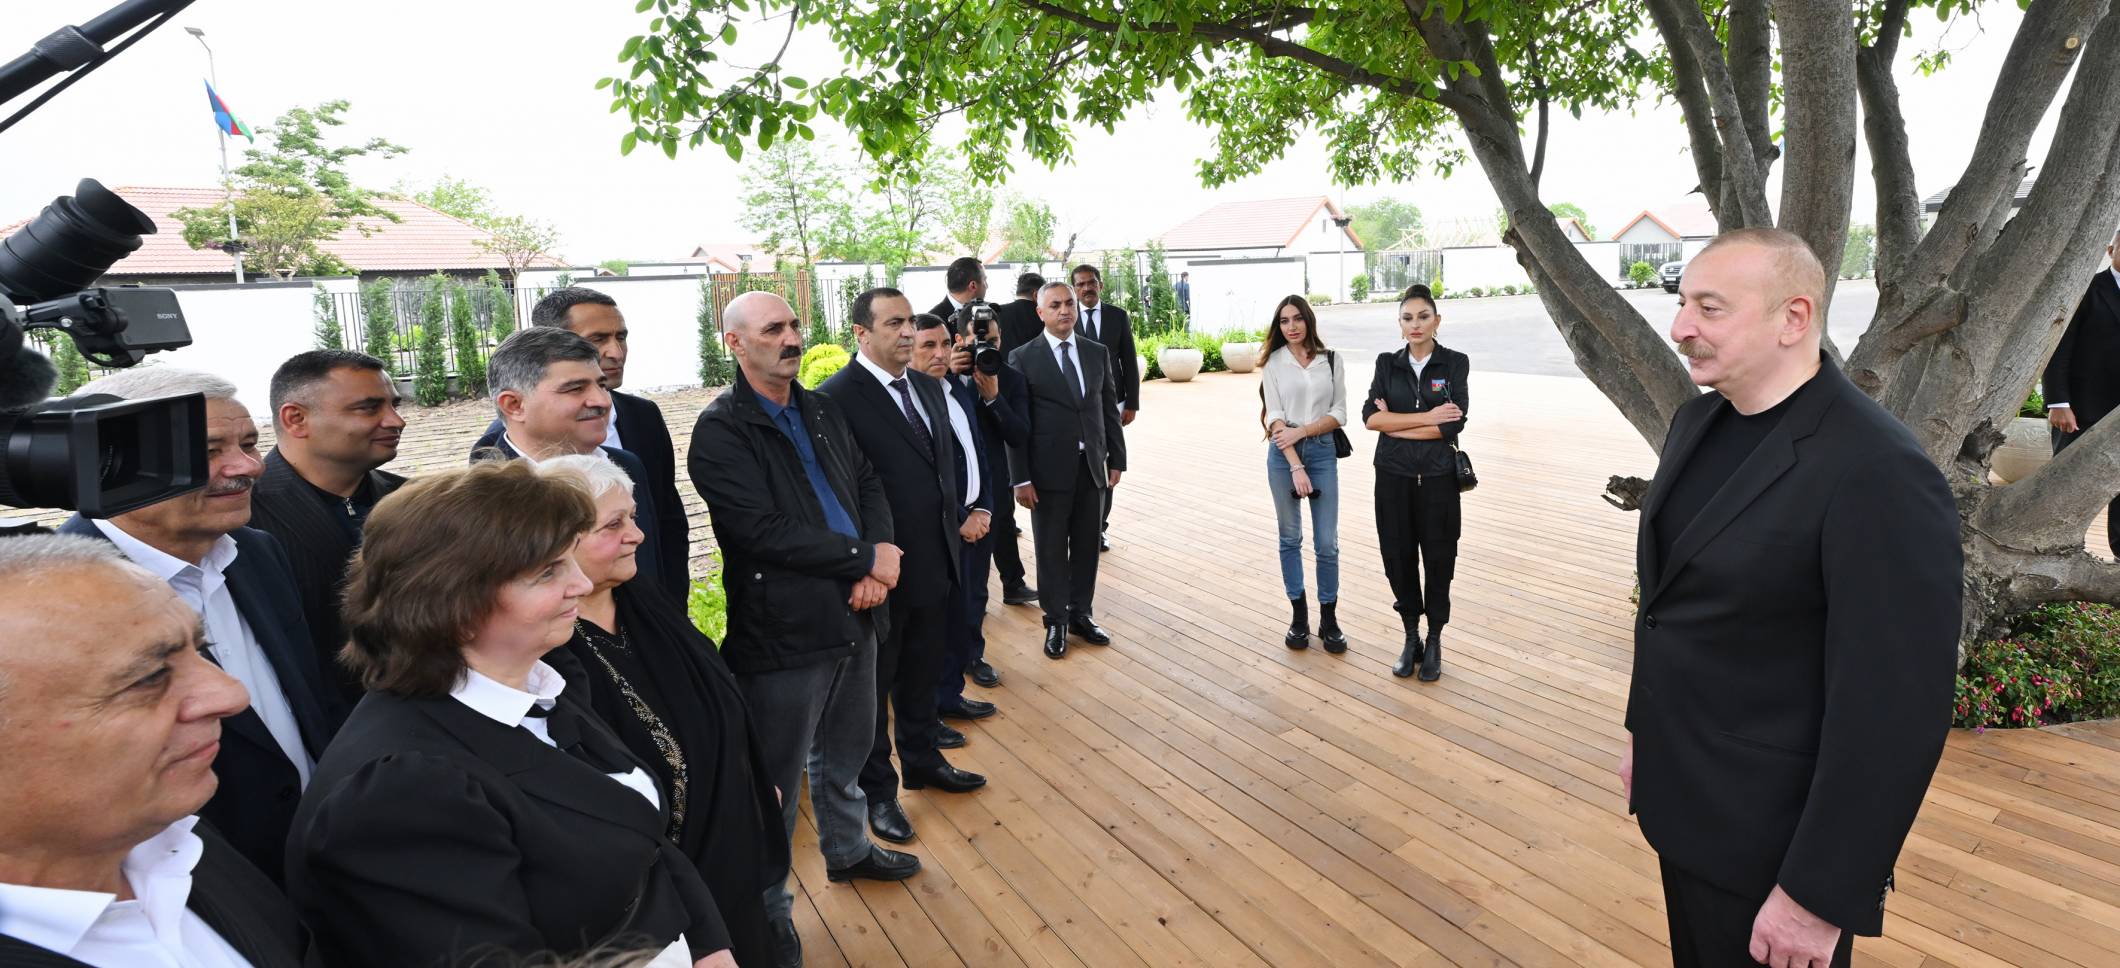 Ilham Aliyev and First Lady Mehriban Aliyeva met with residents who relocated to the city of Khojaly